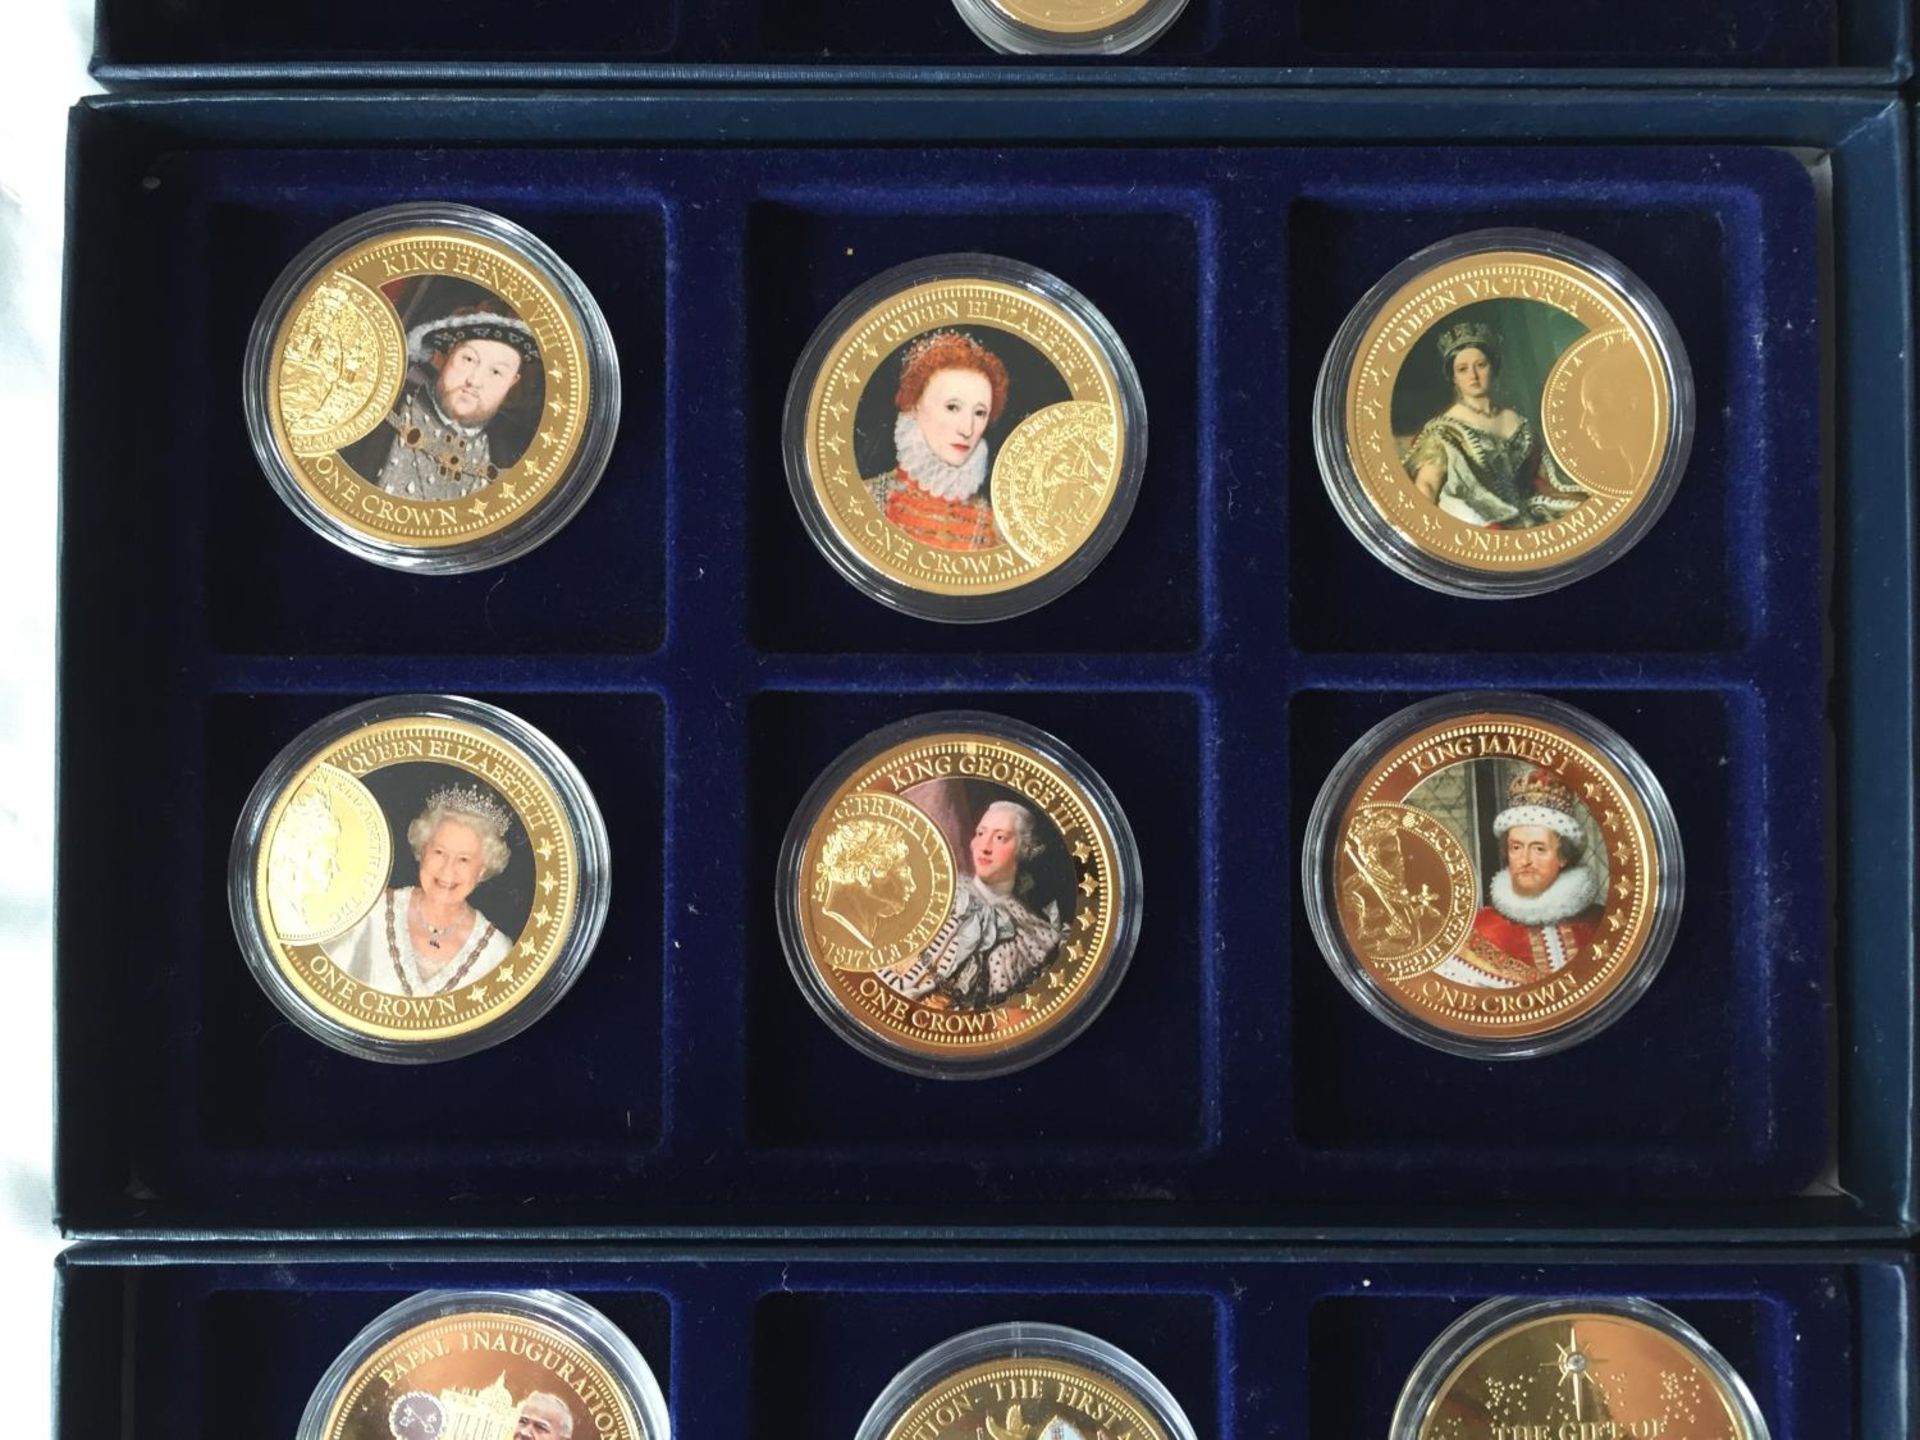 A COLLECTION OF COMMEMORATIVE COINS MOSTLY REPRESENTING VARIOUS MONARCHS ETC. IN CAPSULES, SOME - Image 3 of 7